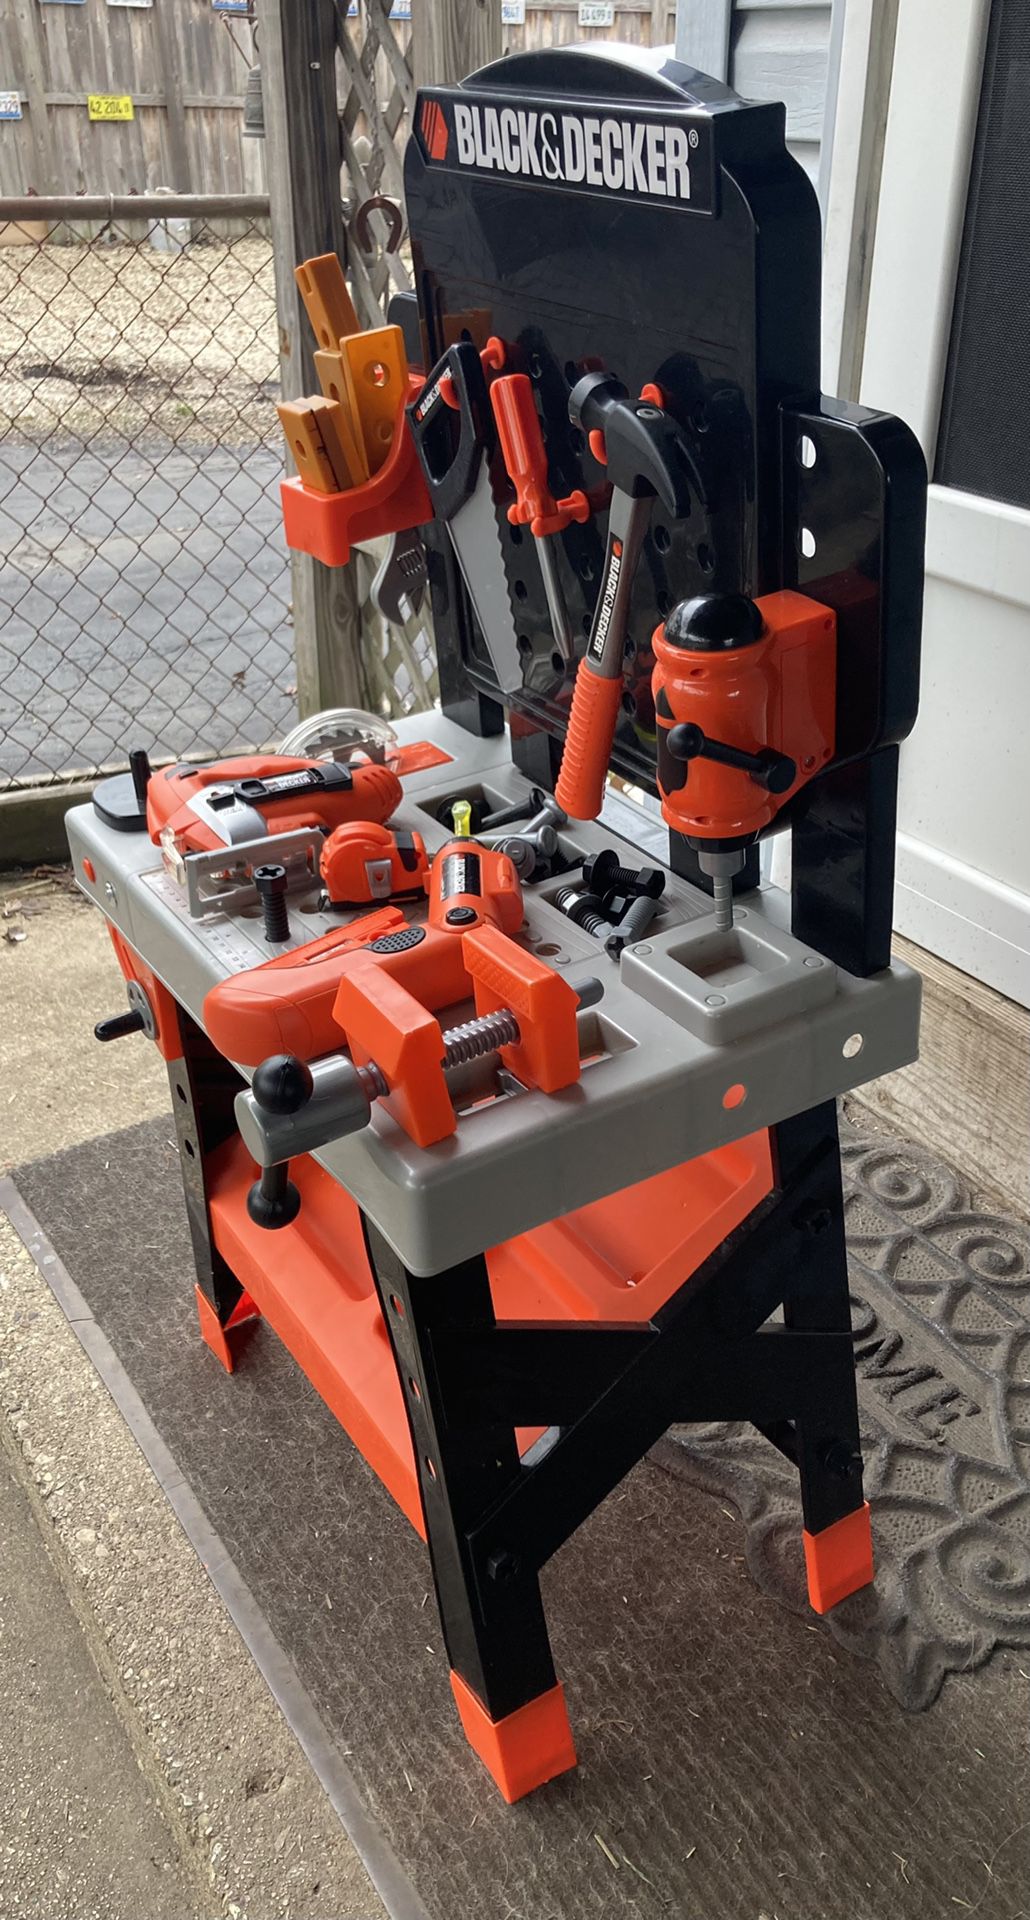 BLACK+DECKER Ready to Build Workbench Toy for Sale in Melrose Park